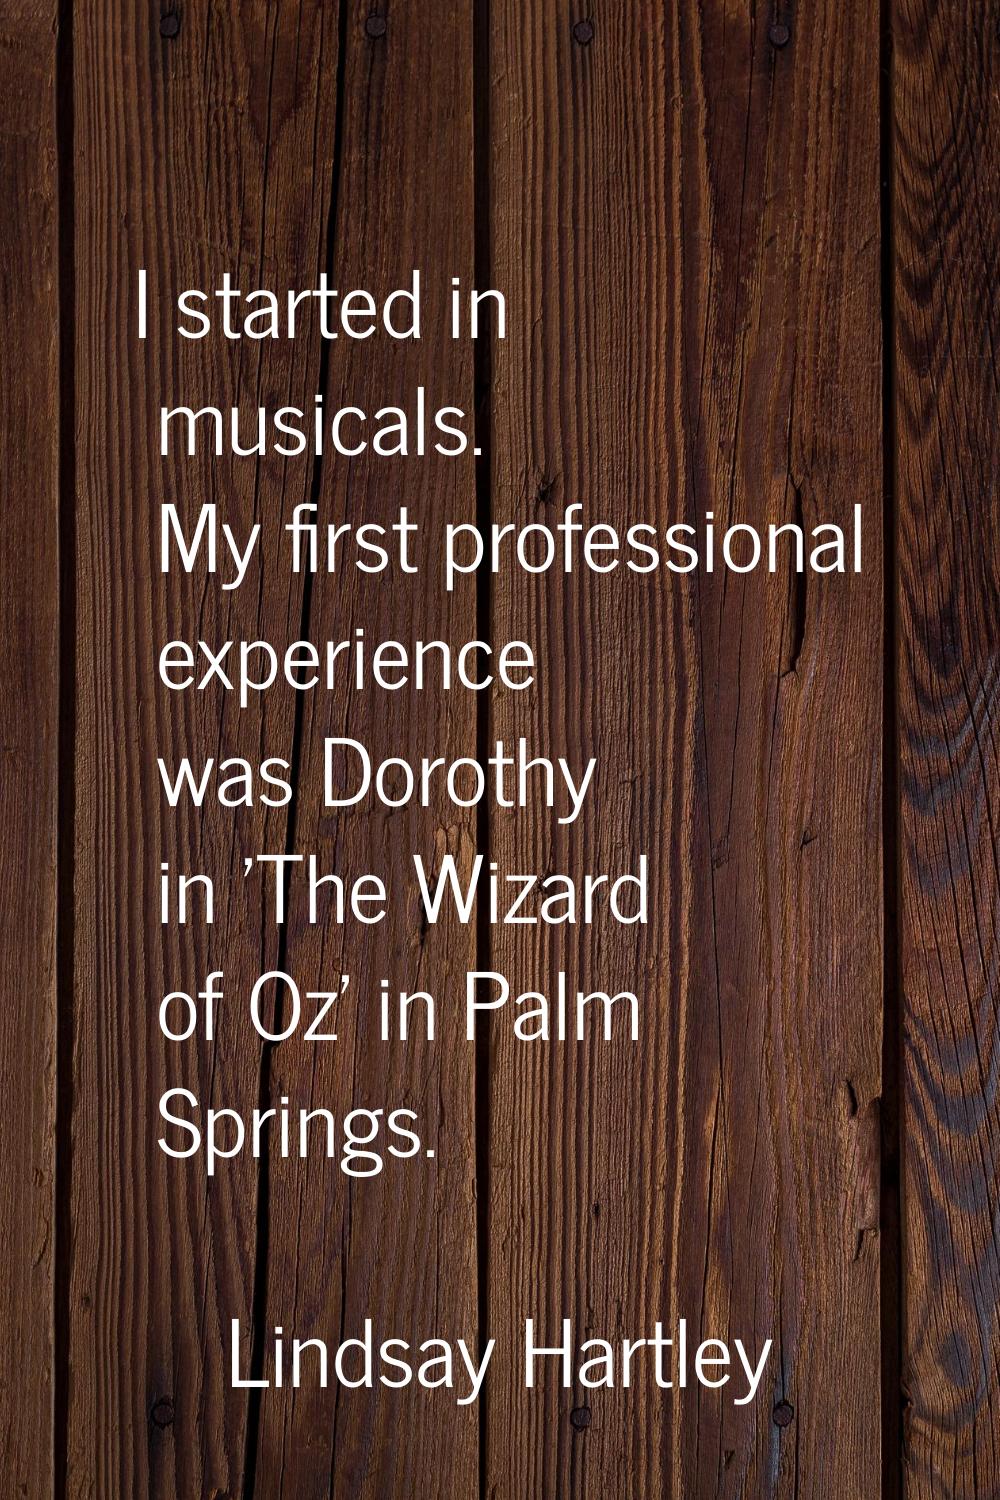 I started in musicals. My first professional experience was Dorothy in 'The Wizard of Oz' in Palm S